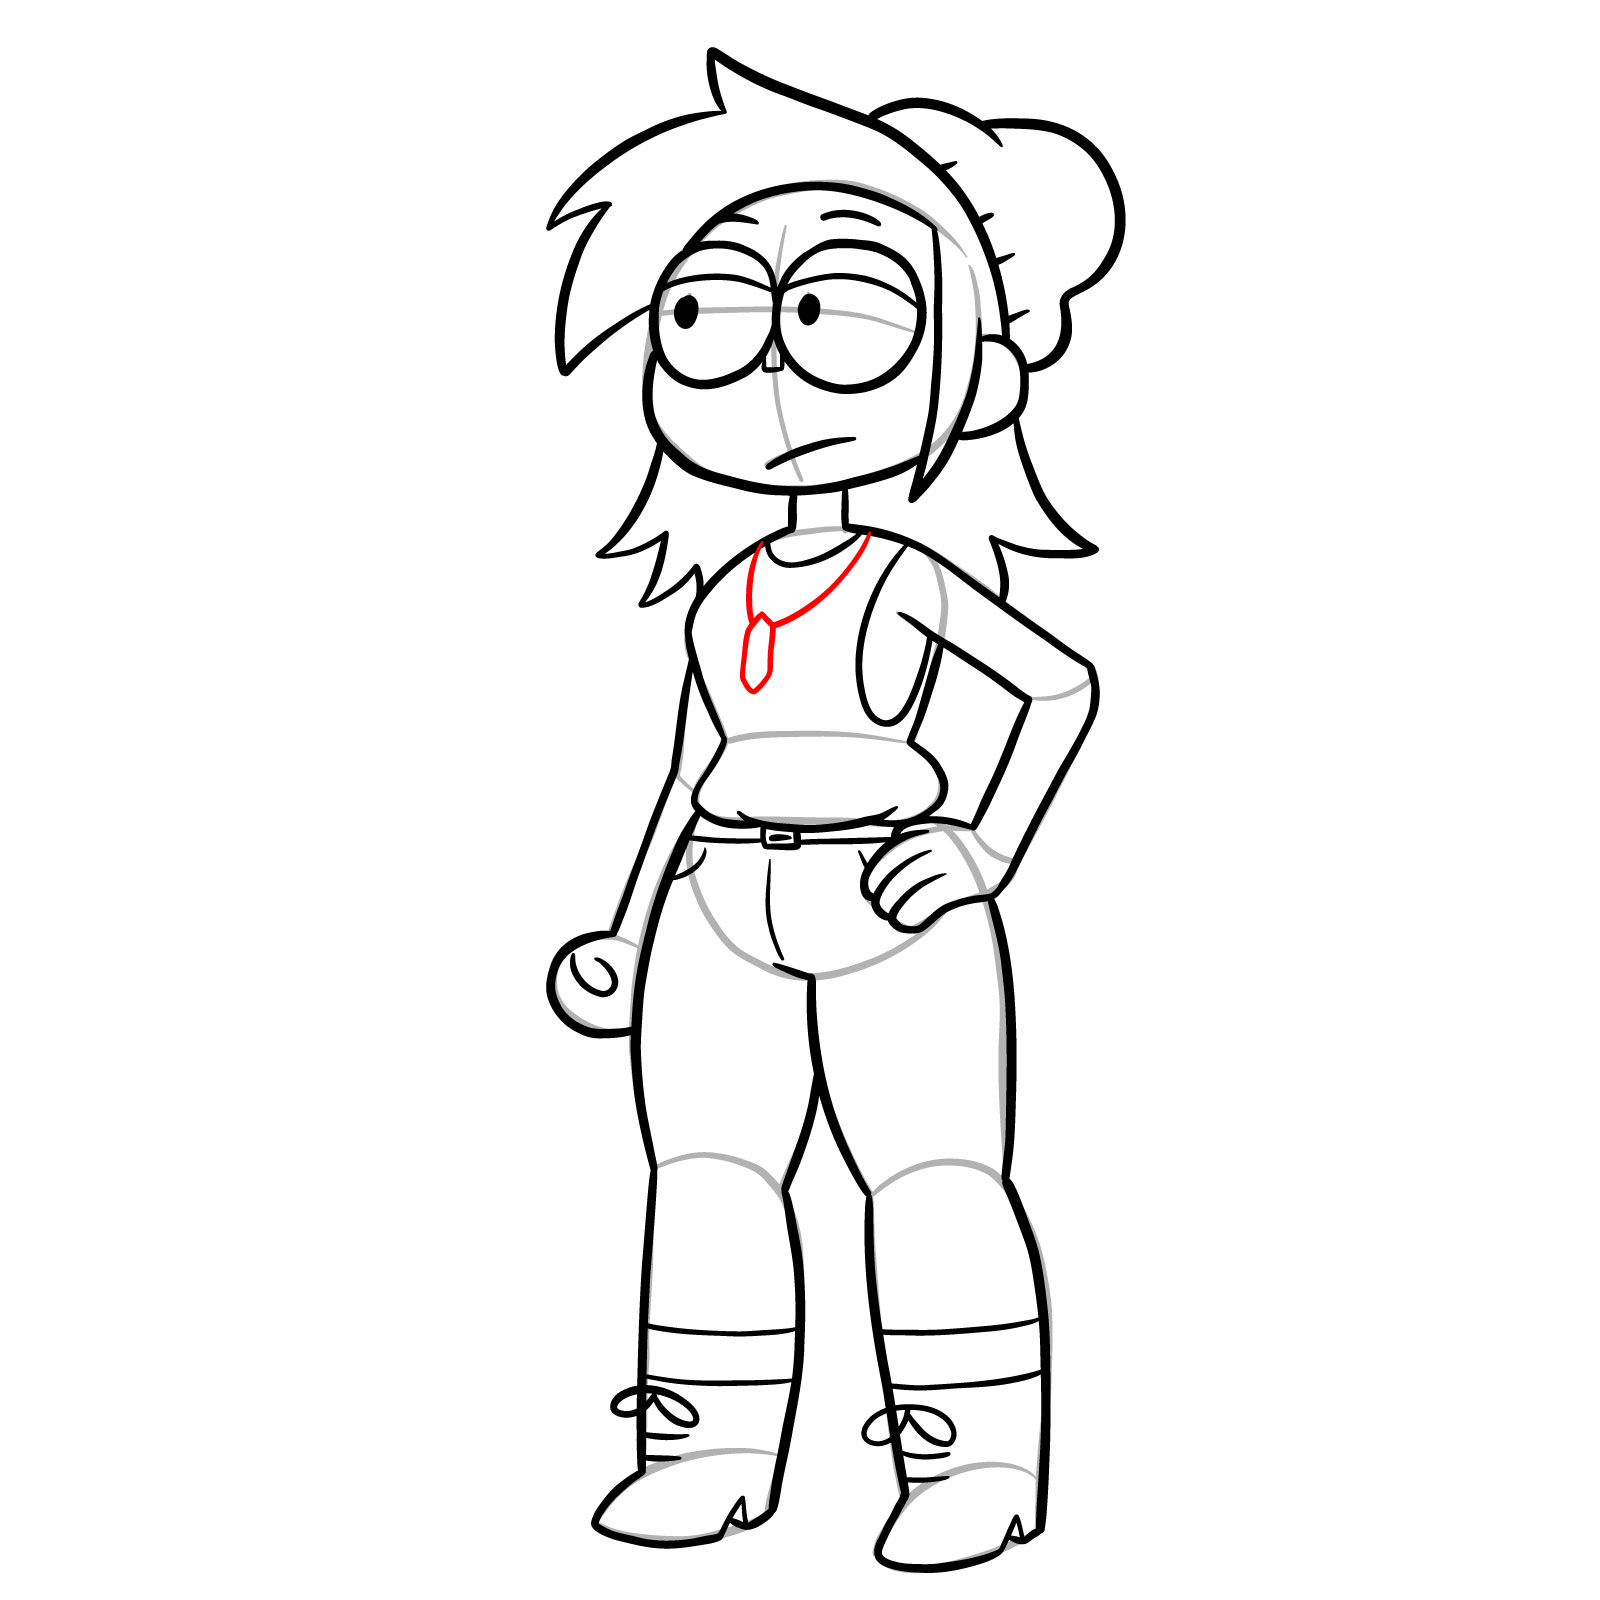 How to draw Actor Enid from OK K.O.! - step 27